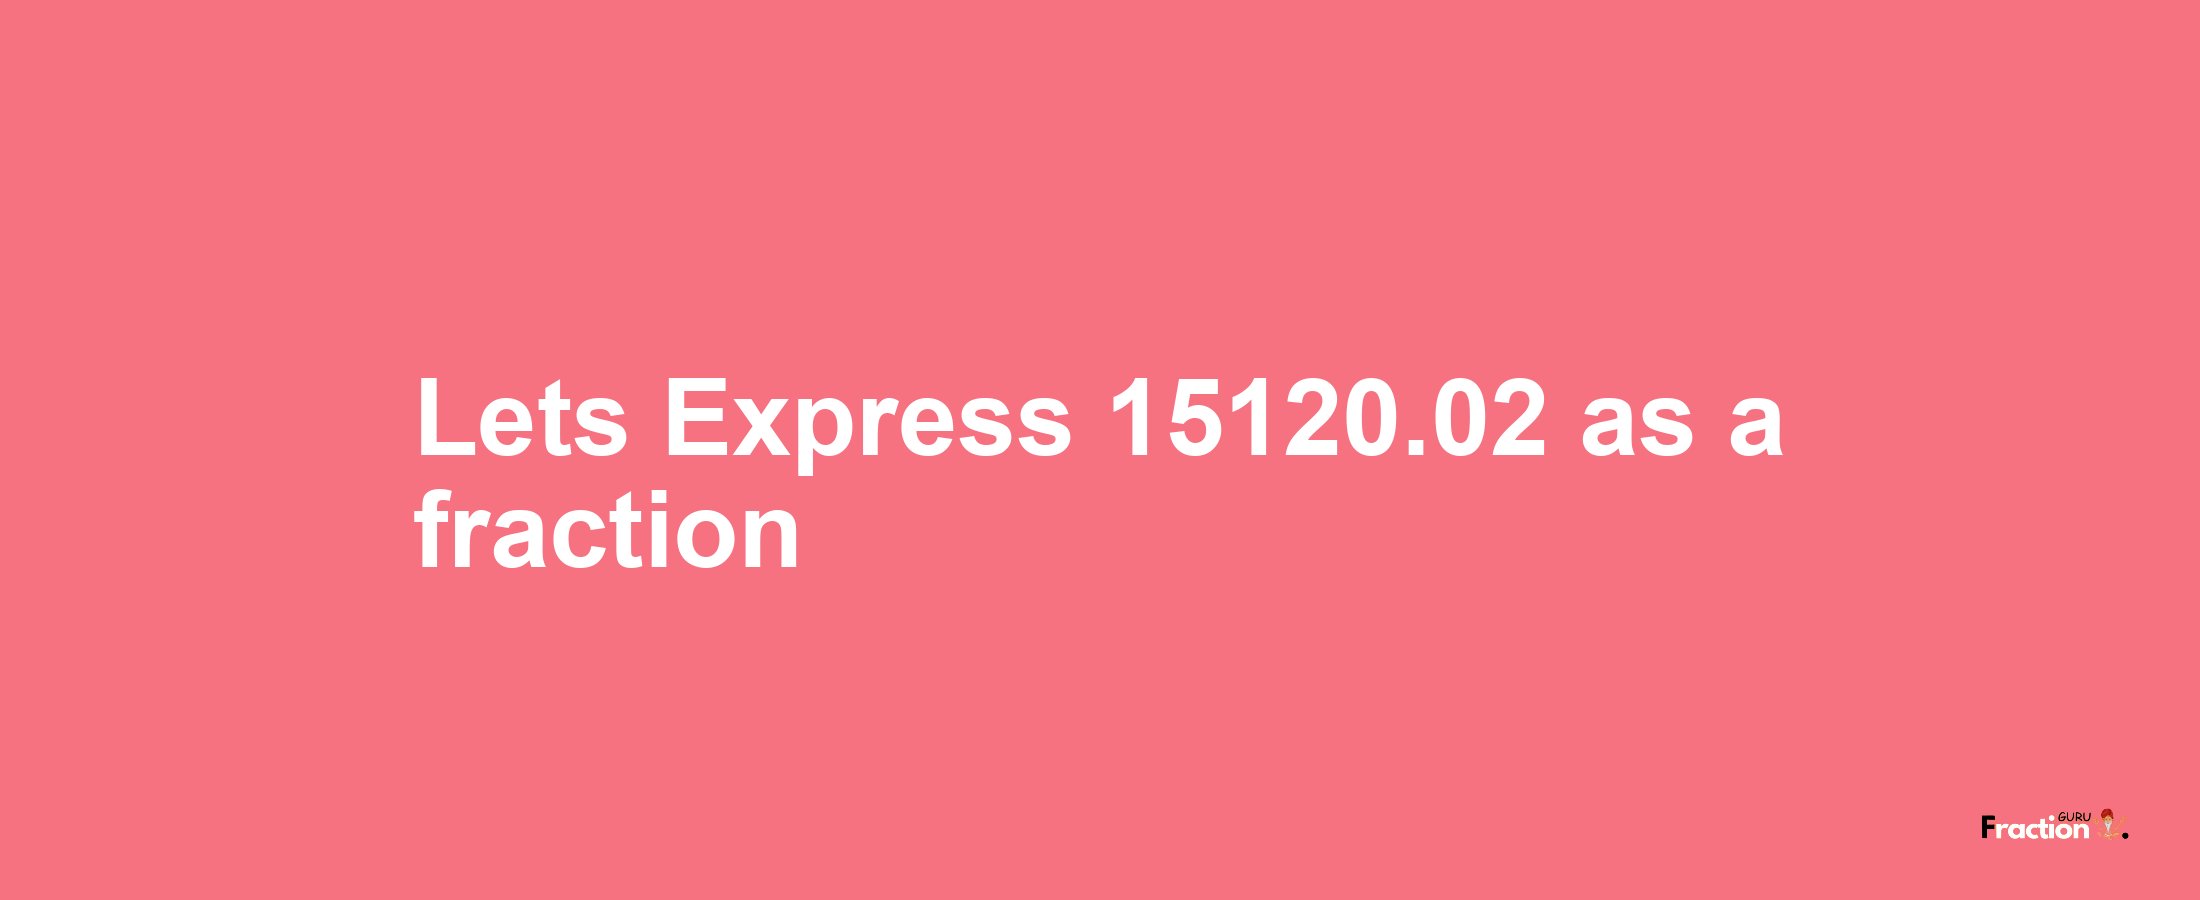 Lets Express 15120.02 as afraction